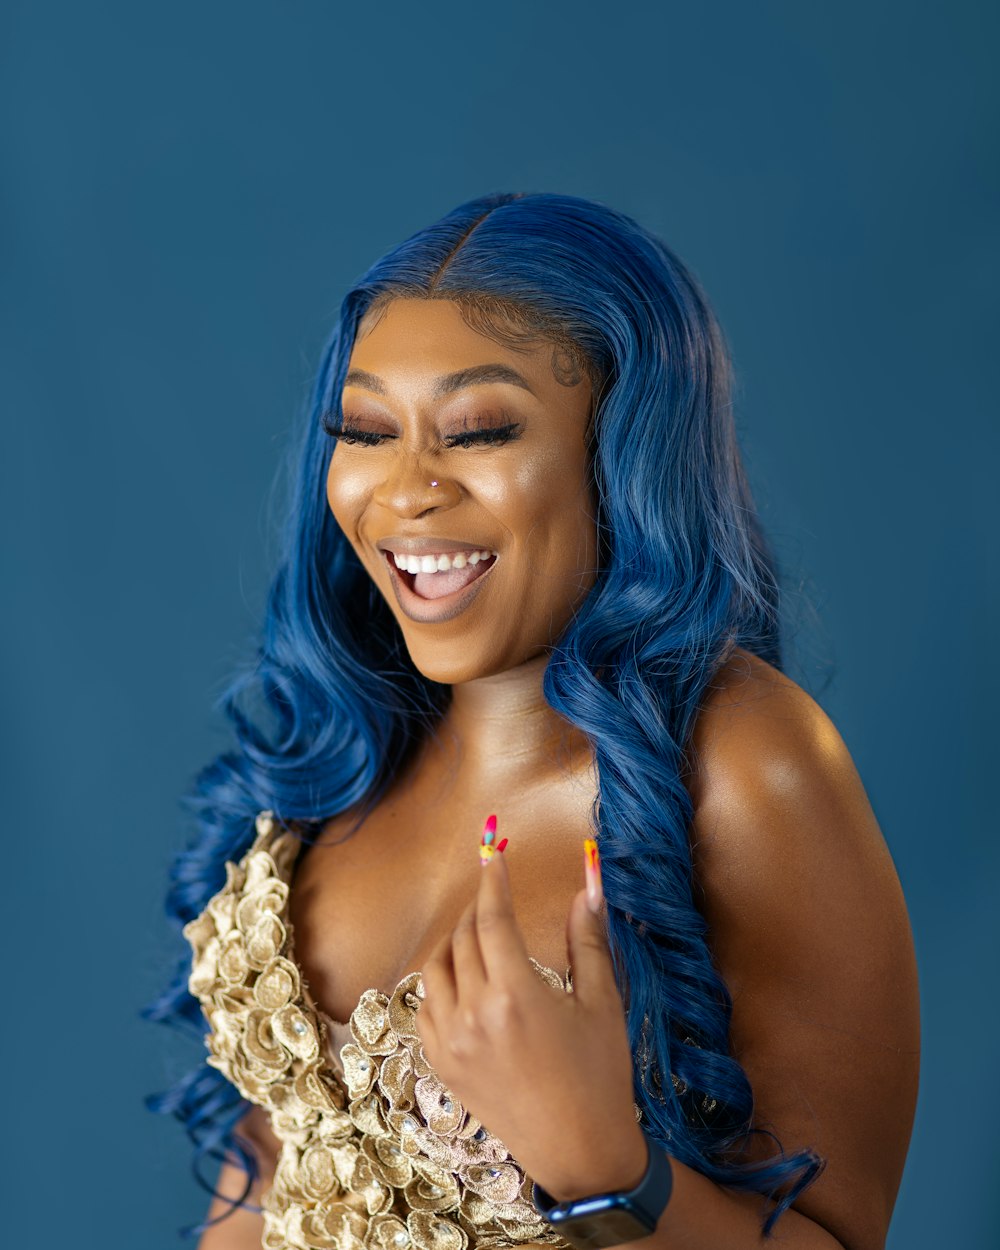 a woman with blue hair smiling and wearing a gold dress